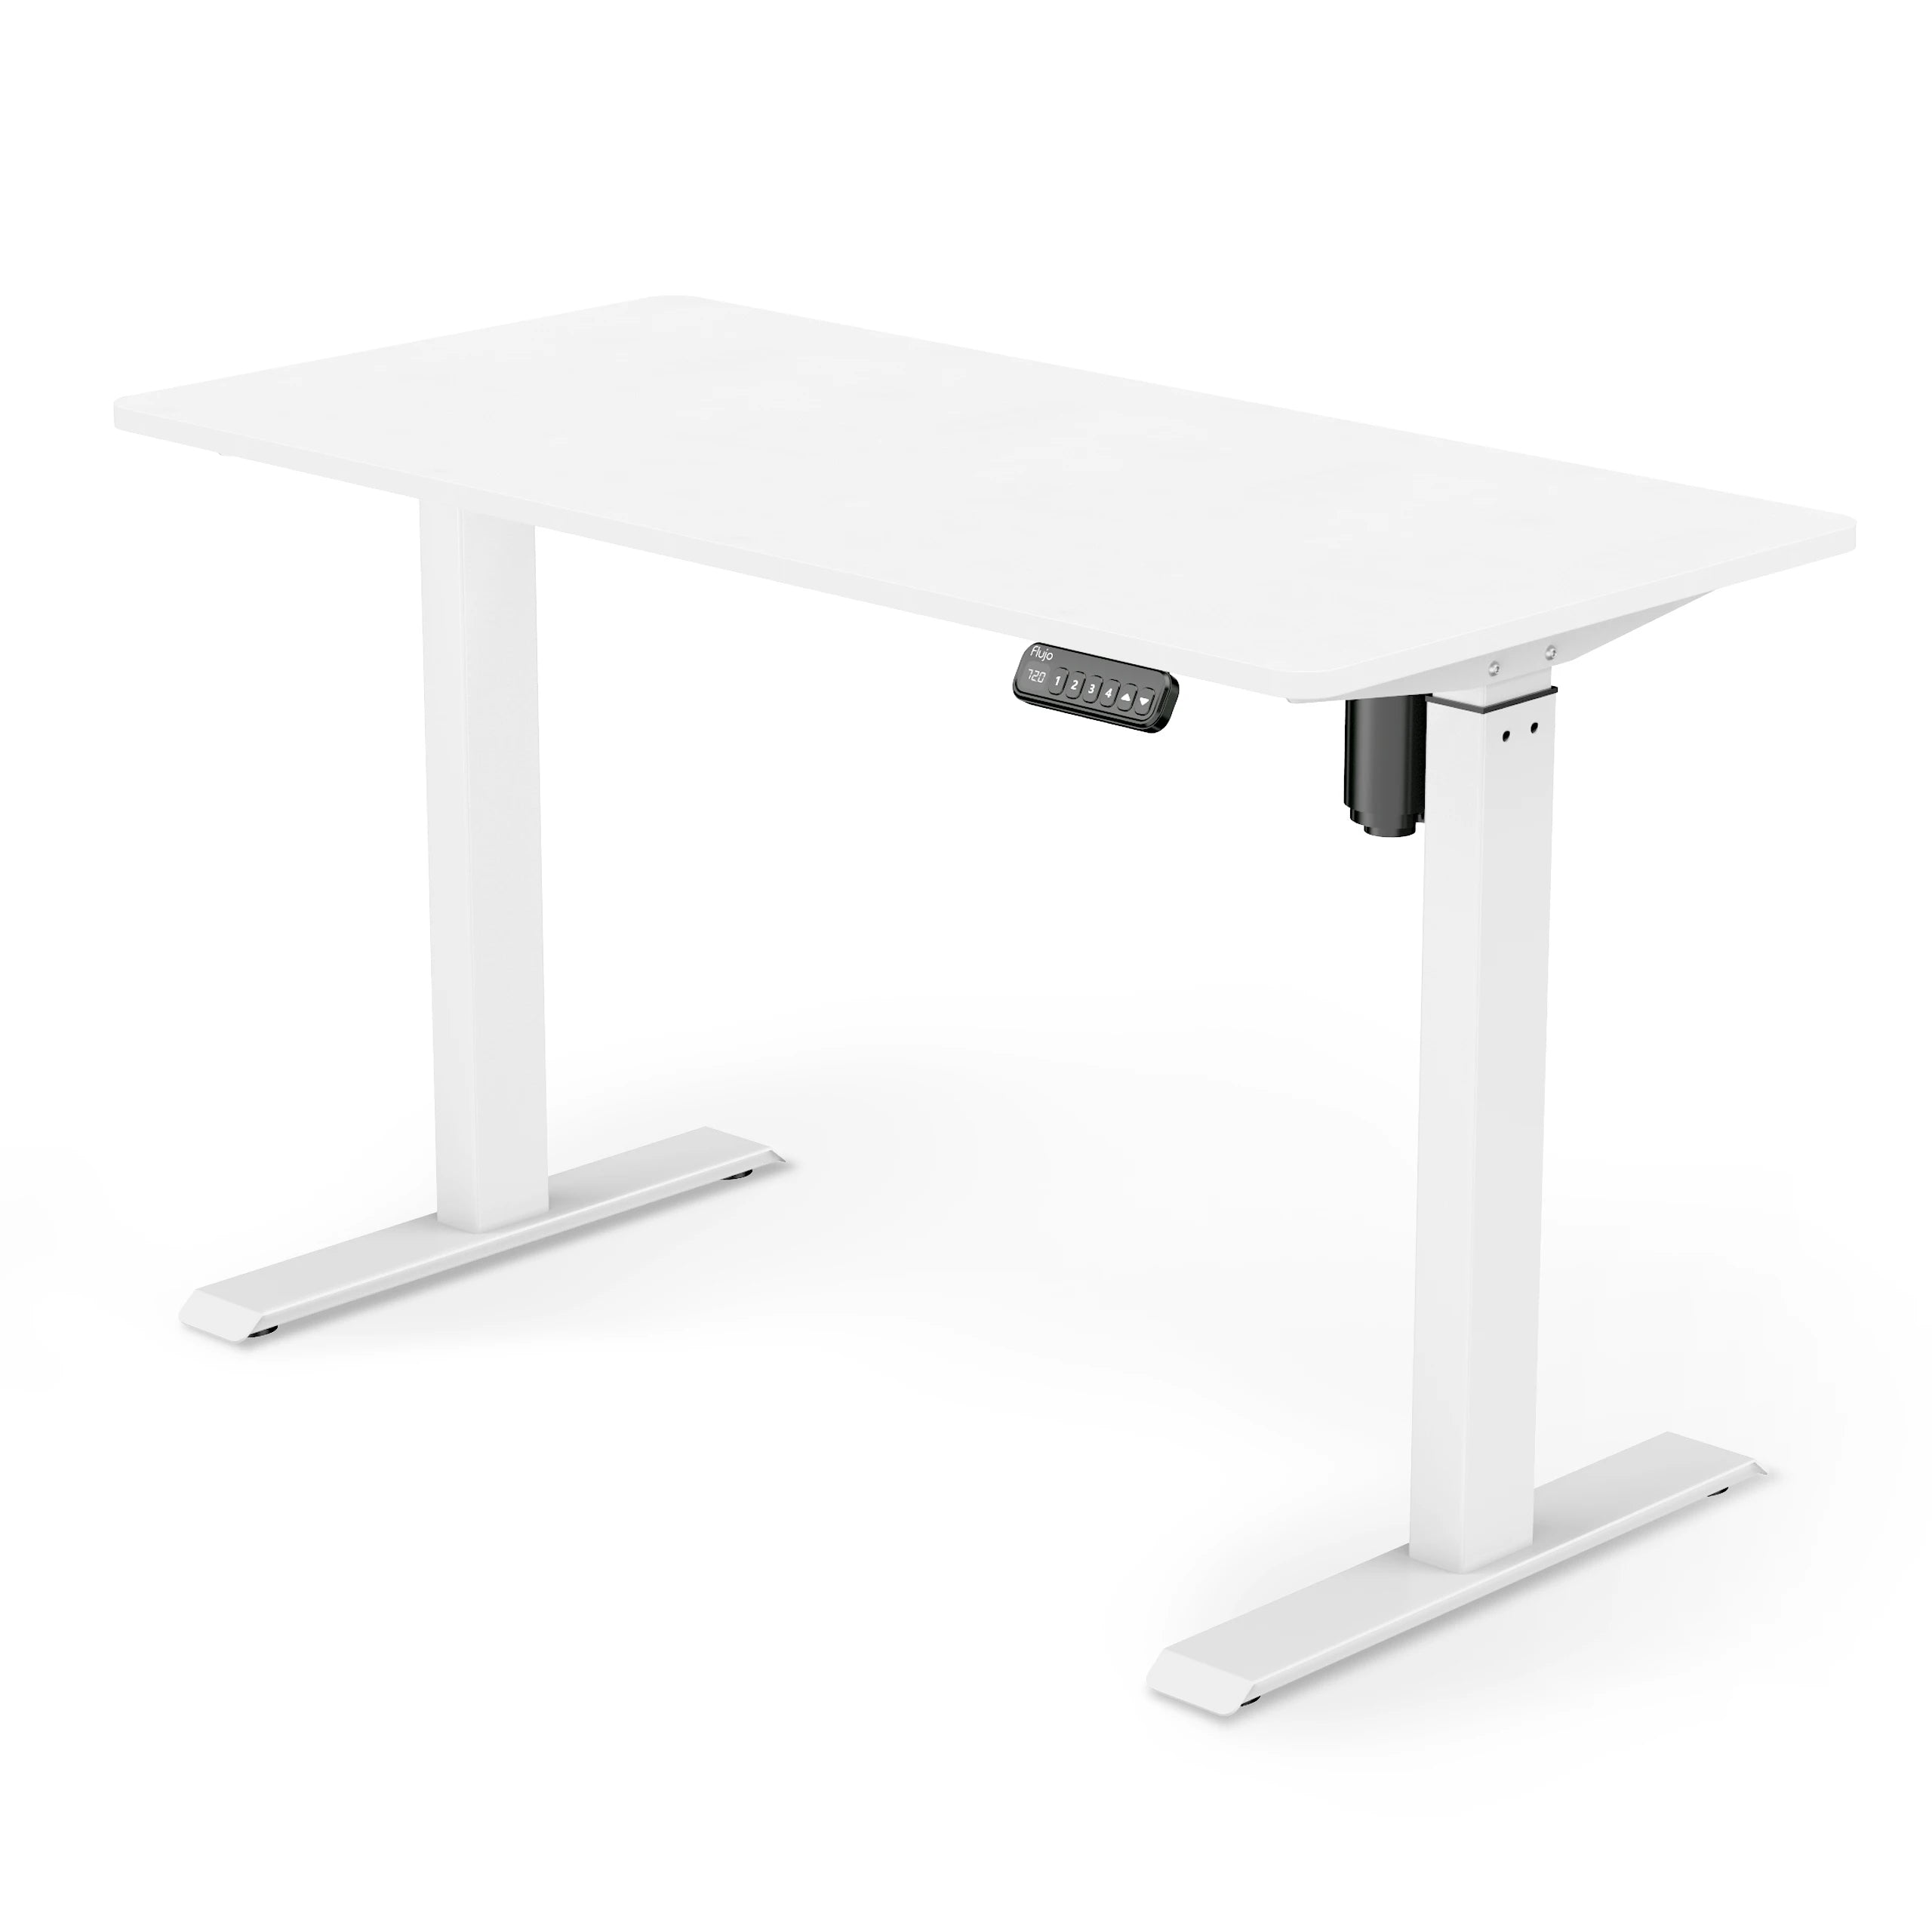 SmarTrax Ergonomic Standing Desk featuring a Warm White wood finish and white frame, complete with programmable height settings for a comfortable standing work experience.